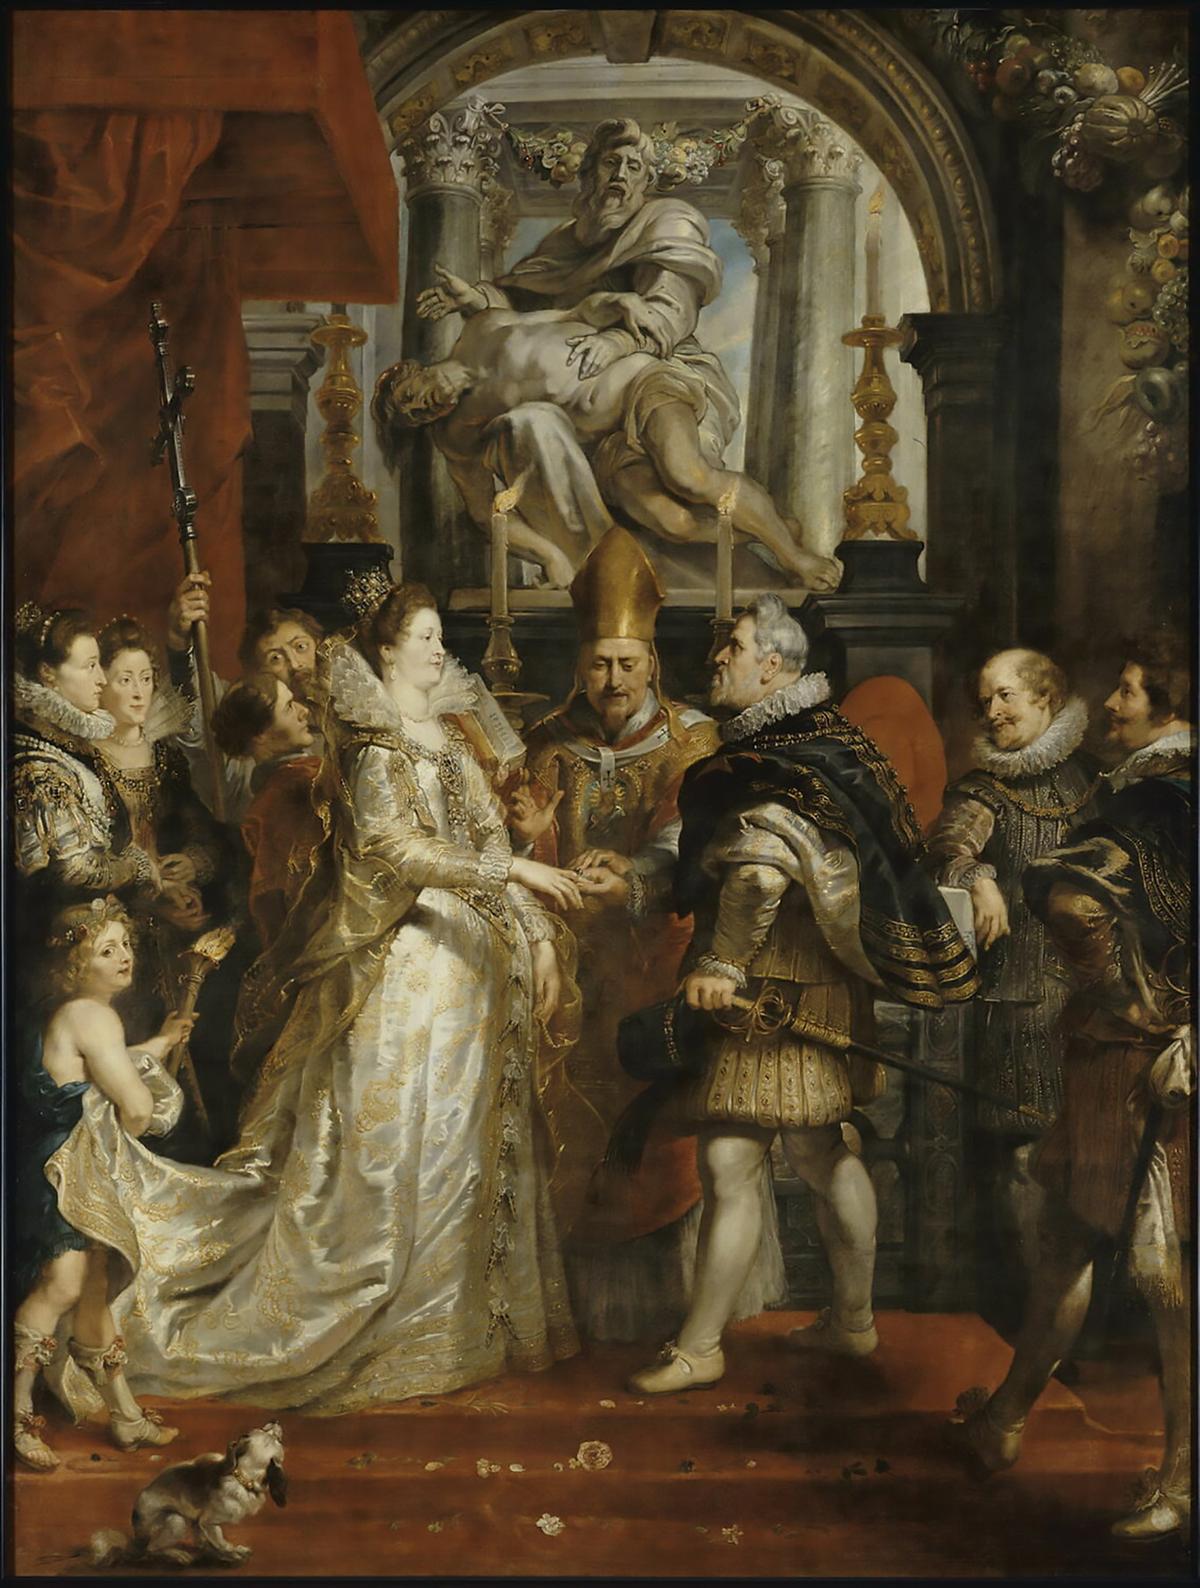 "The Wedding by Proxy of Marie de' Medici to King Henri IV," from the Marie de' Medici cycle, circa 1622–1625, by Peter Paul Rubens. Oil on canvas. Louvre Museum, Paris. (Public Domain)